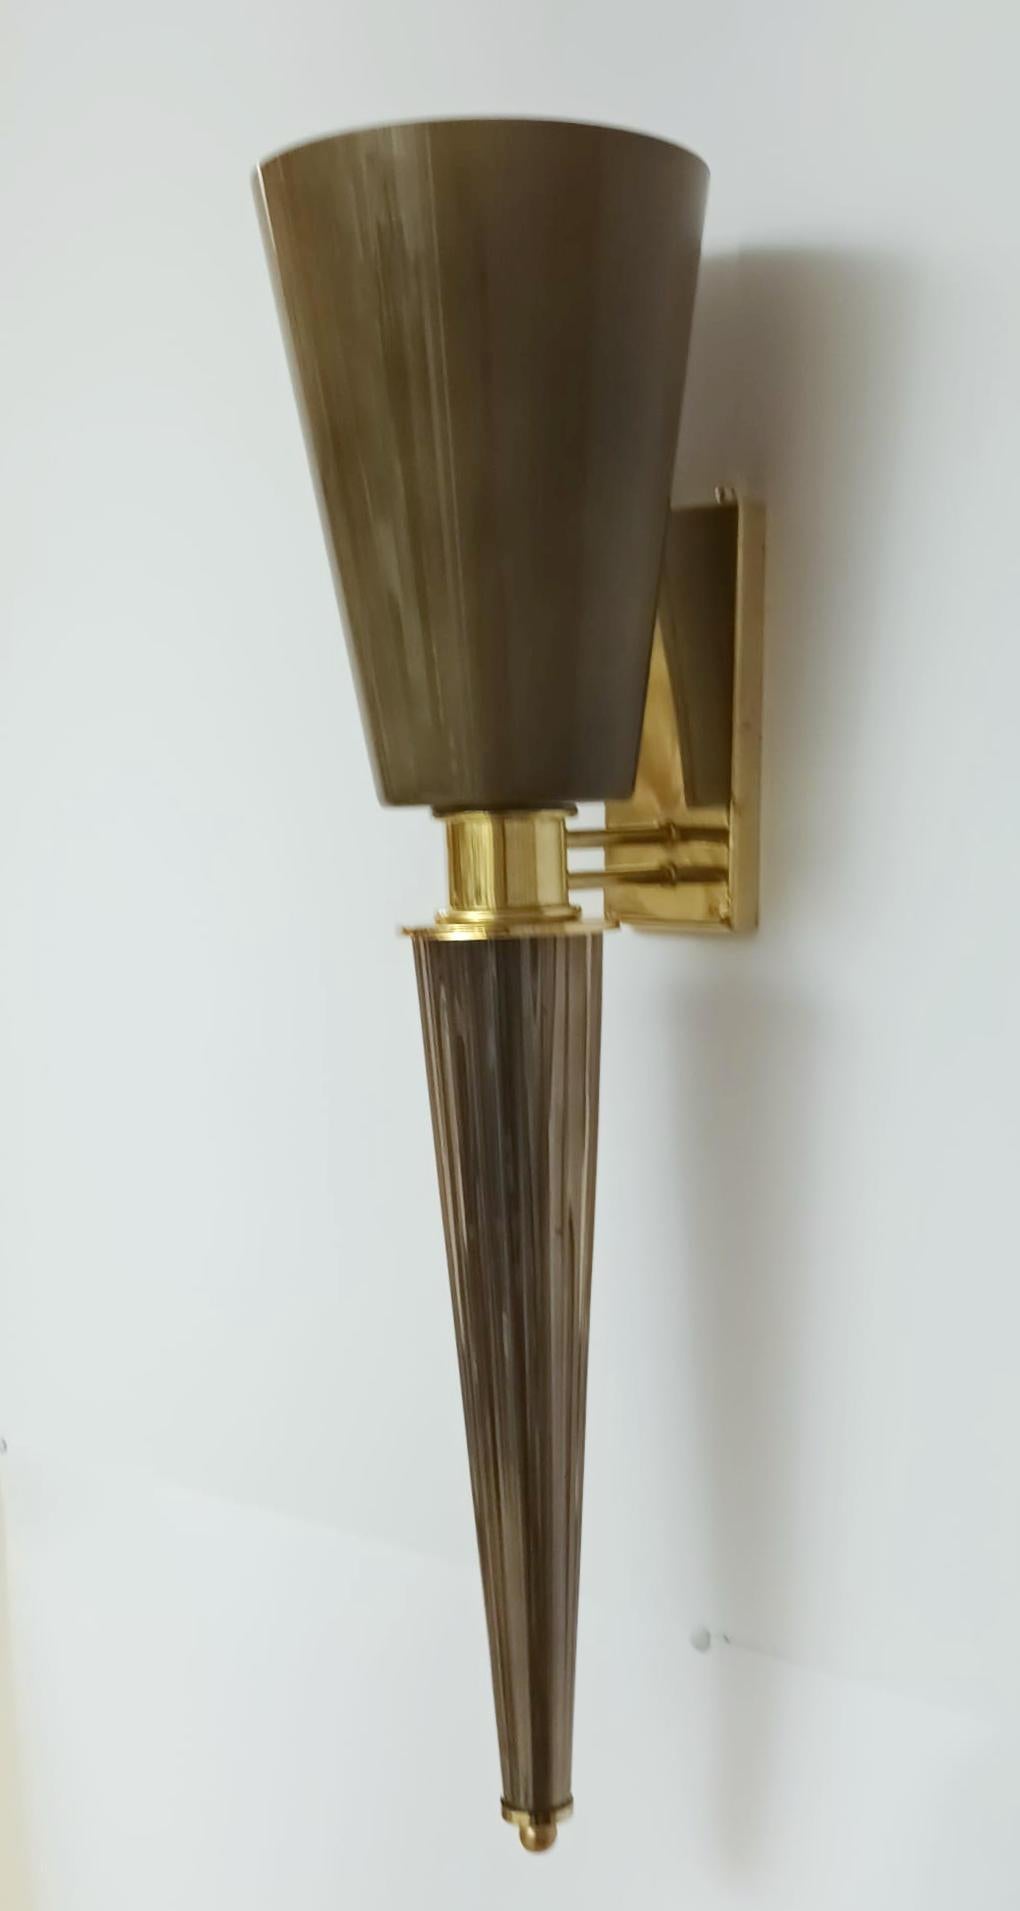 Italian torchere wall sconces with hand blown smoky gray Murano glass cone shades mounted on brass frames / Made in Italy
1 light / E26 or E27 type / max 60W
Measures: height 29.5 inches, width 8 inches, depth 10 inches
2 pairs in stock in Italy,